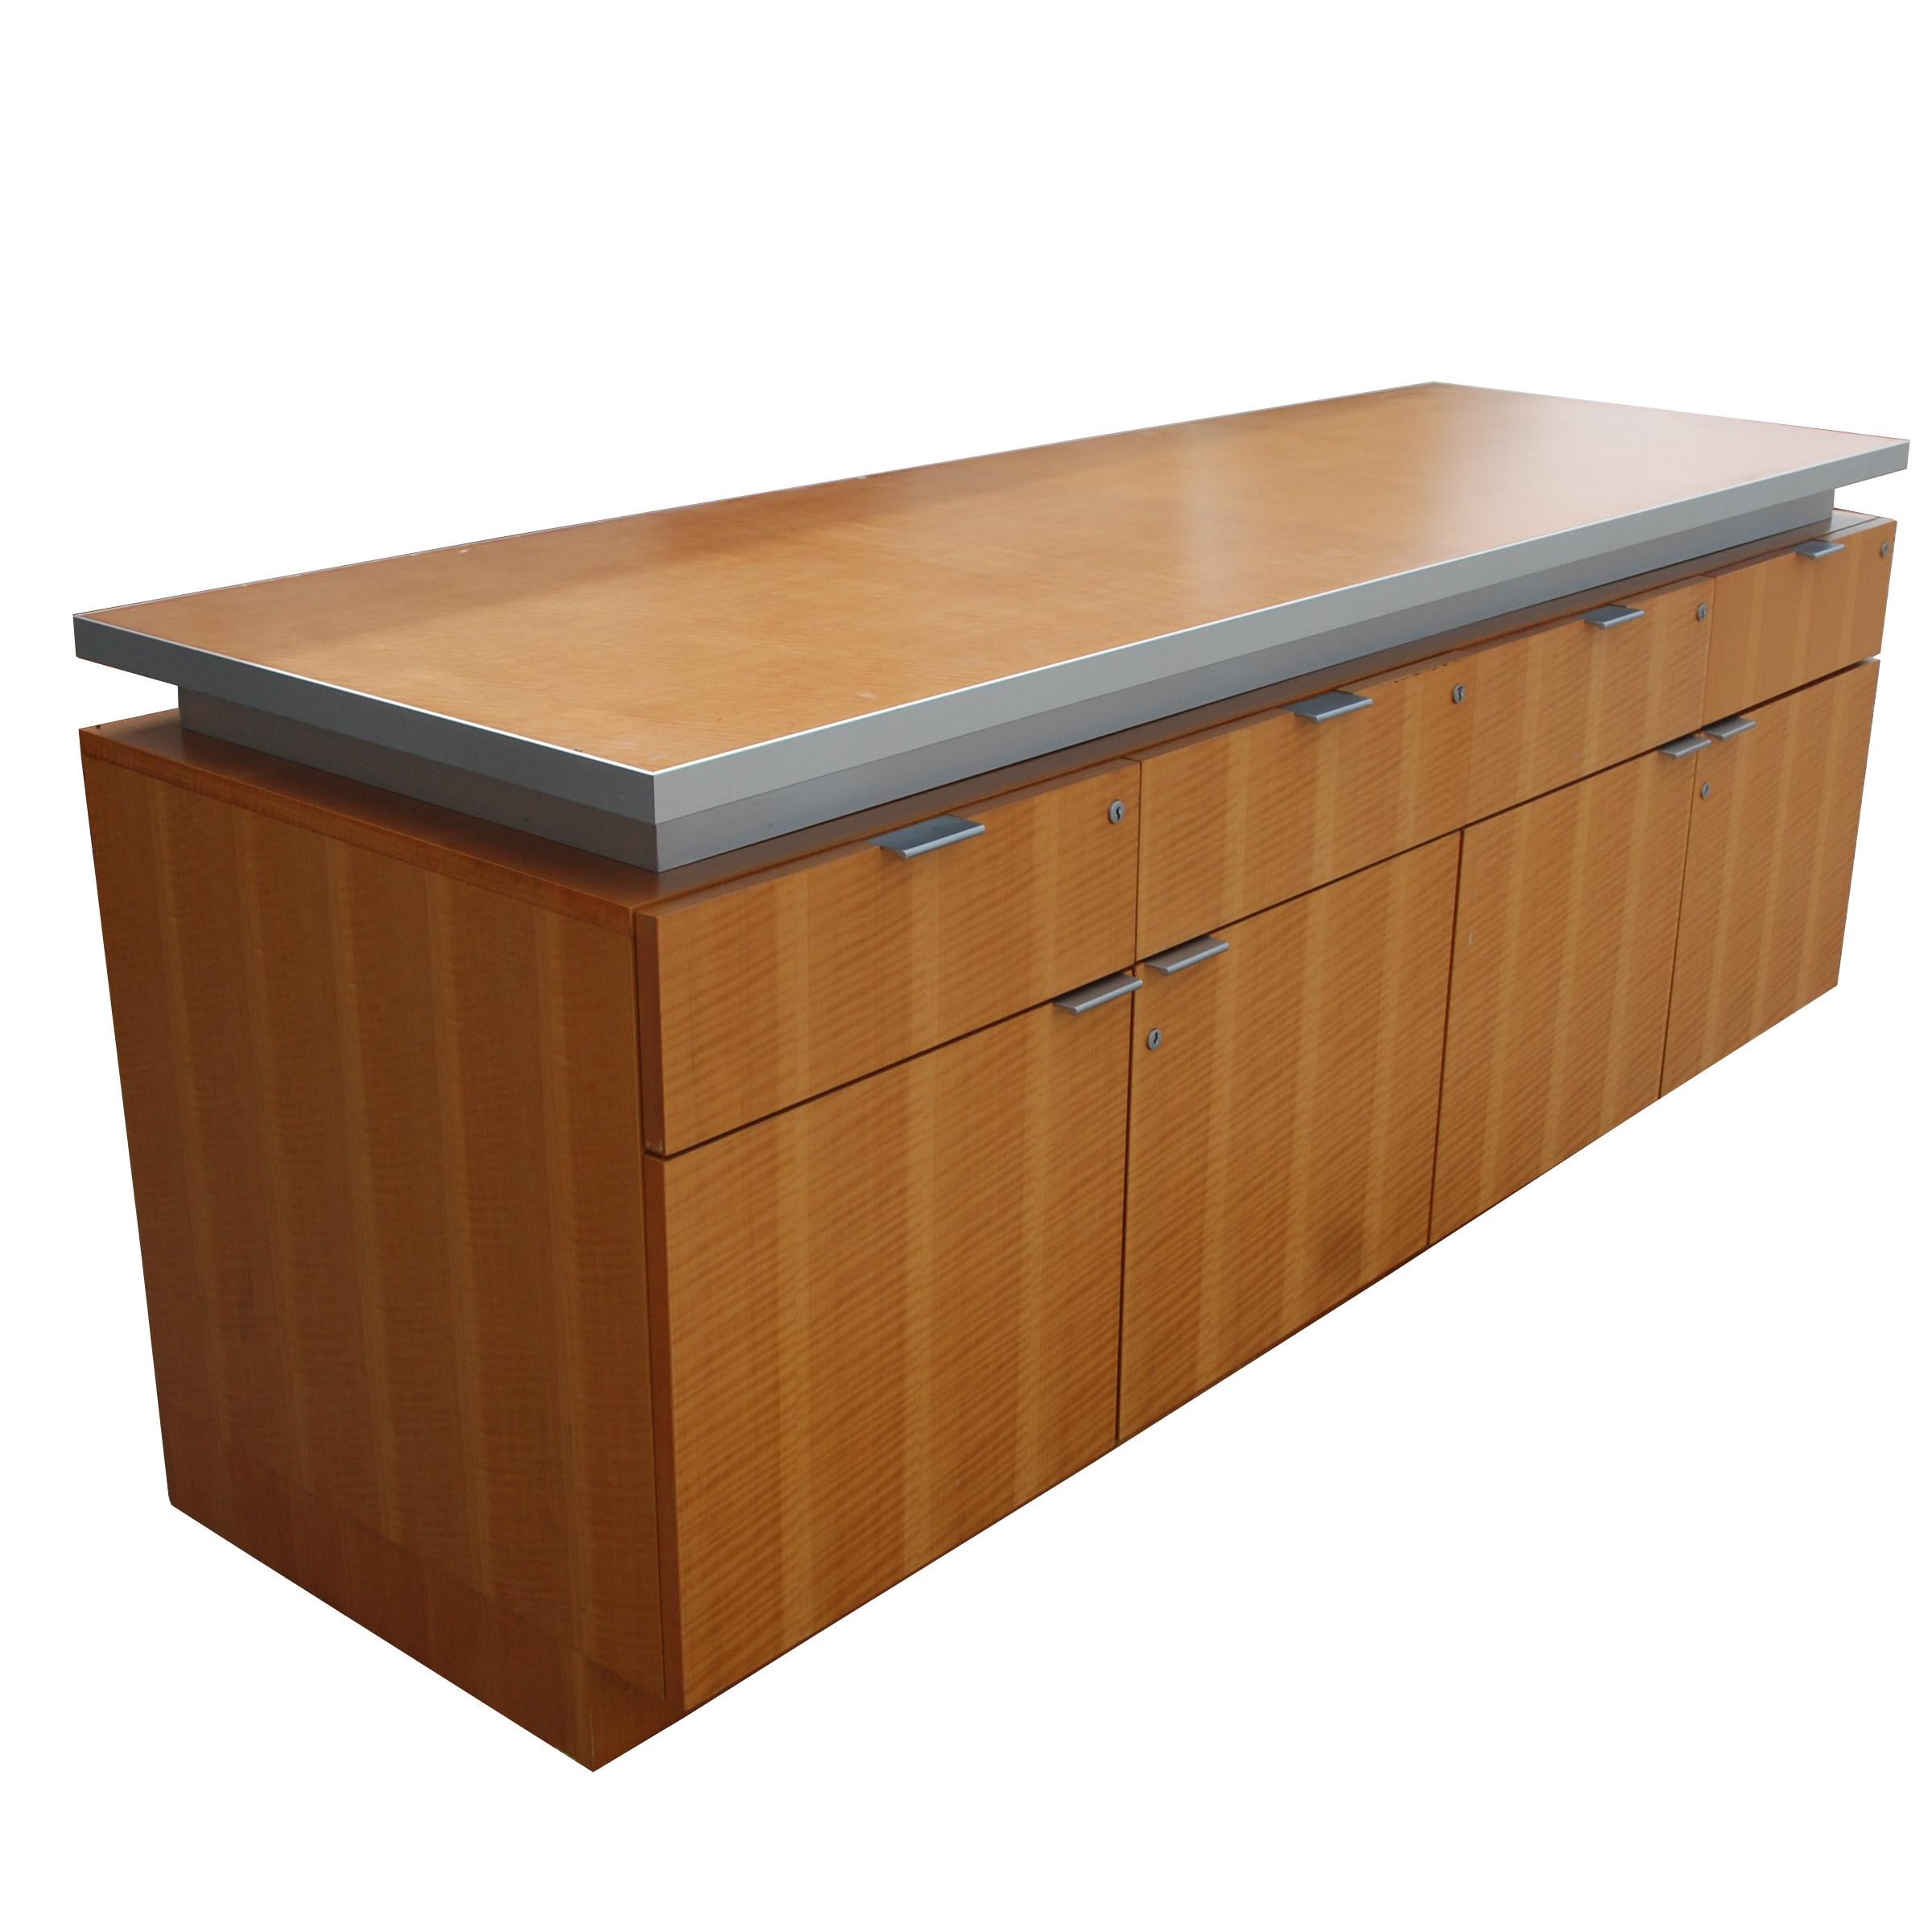 Bernhardt Credenza

A rare modern chrome and maple credenza.
4 drawers with ample storage underneath with shelving.
Chrome pulls. Marked Bernhardt.

See pedestal desk also available. Measure: 72